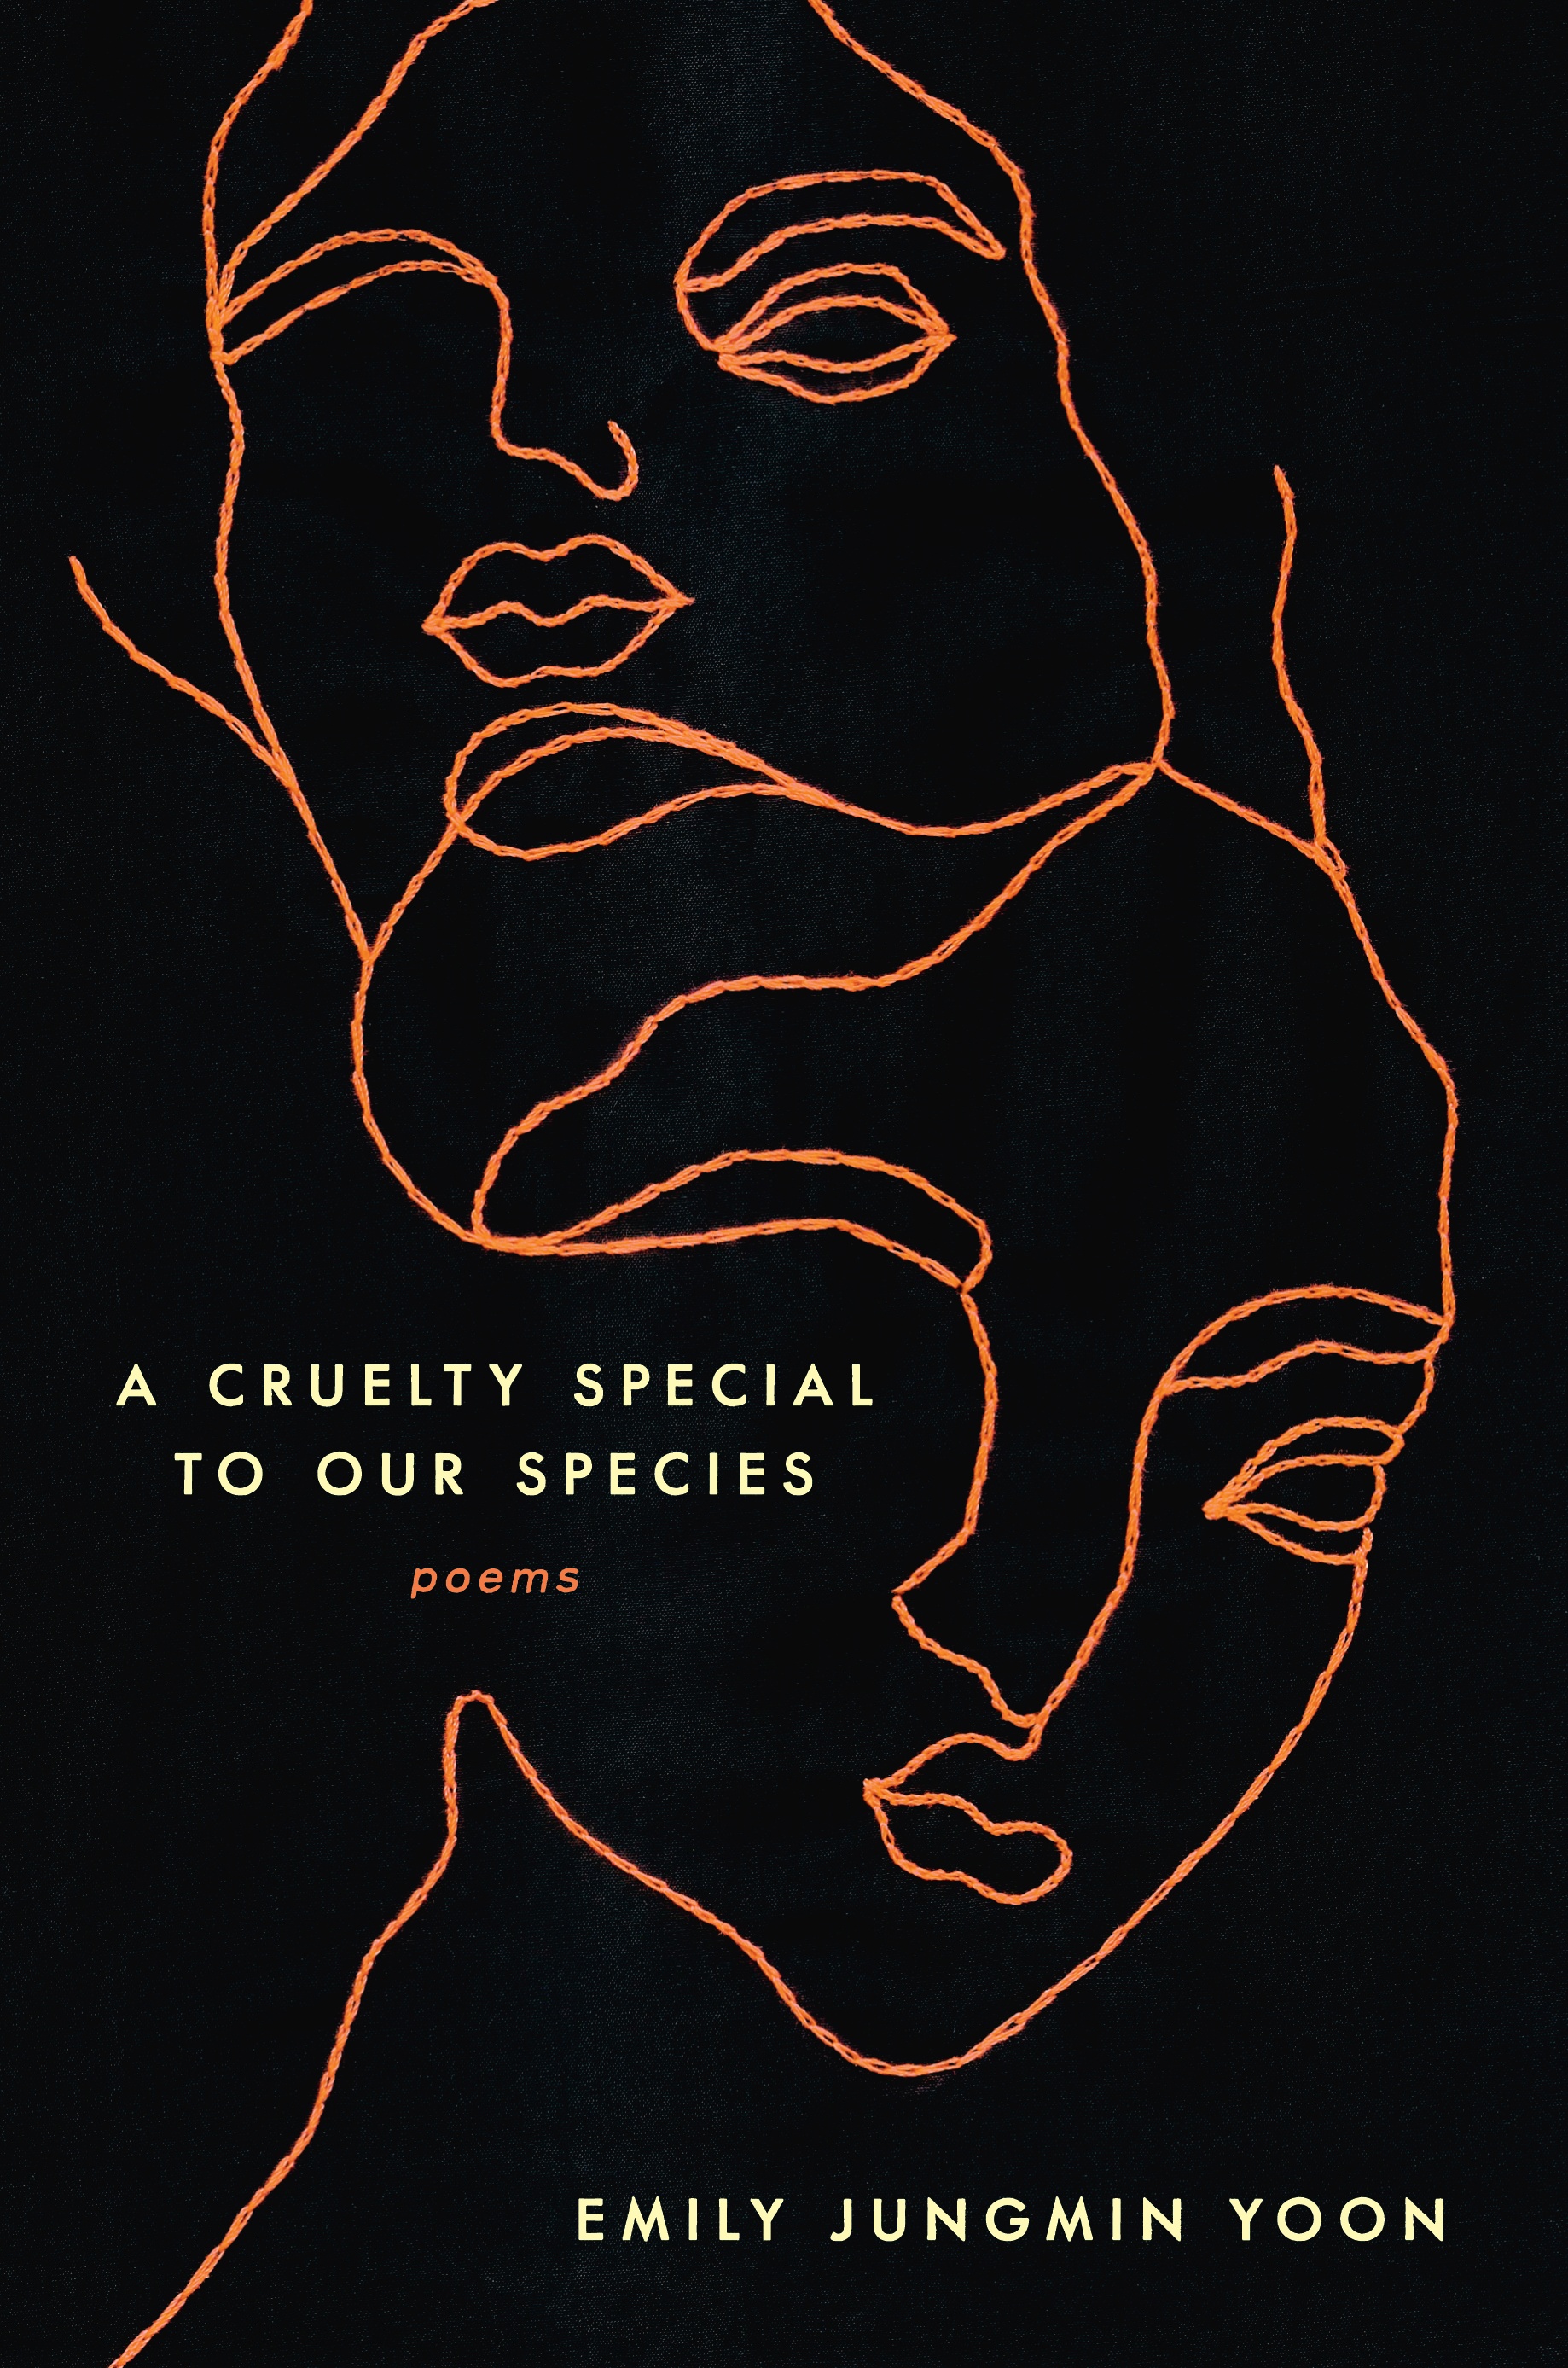 A Cruelty Special to Our Species by Emily Jungmin Yoon